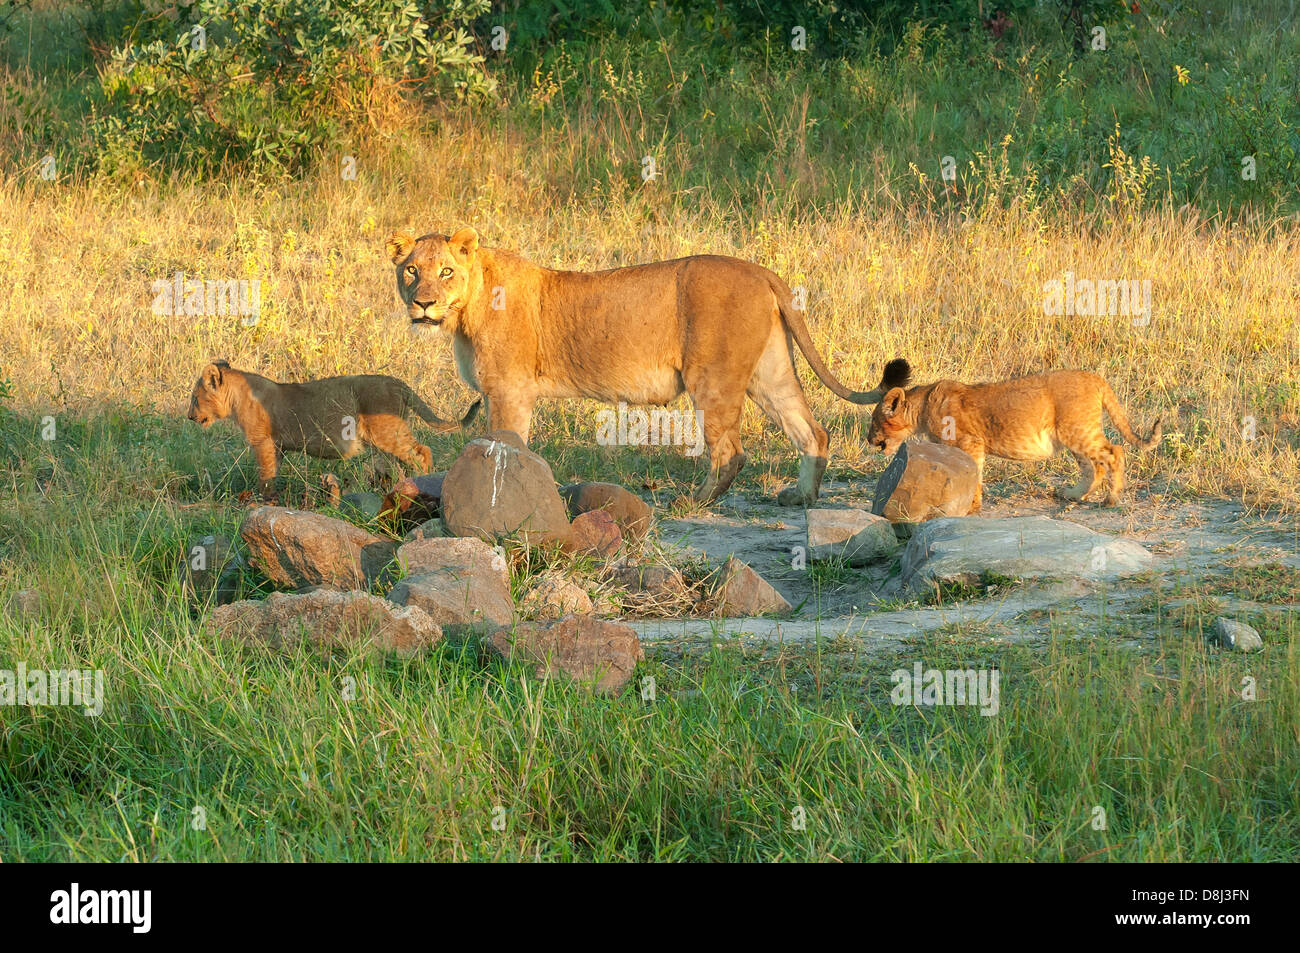 Lion and Cubs in Sabi Sands Game Reserve, Mpumalanga, South Africa Stock Photo